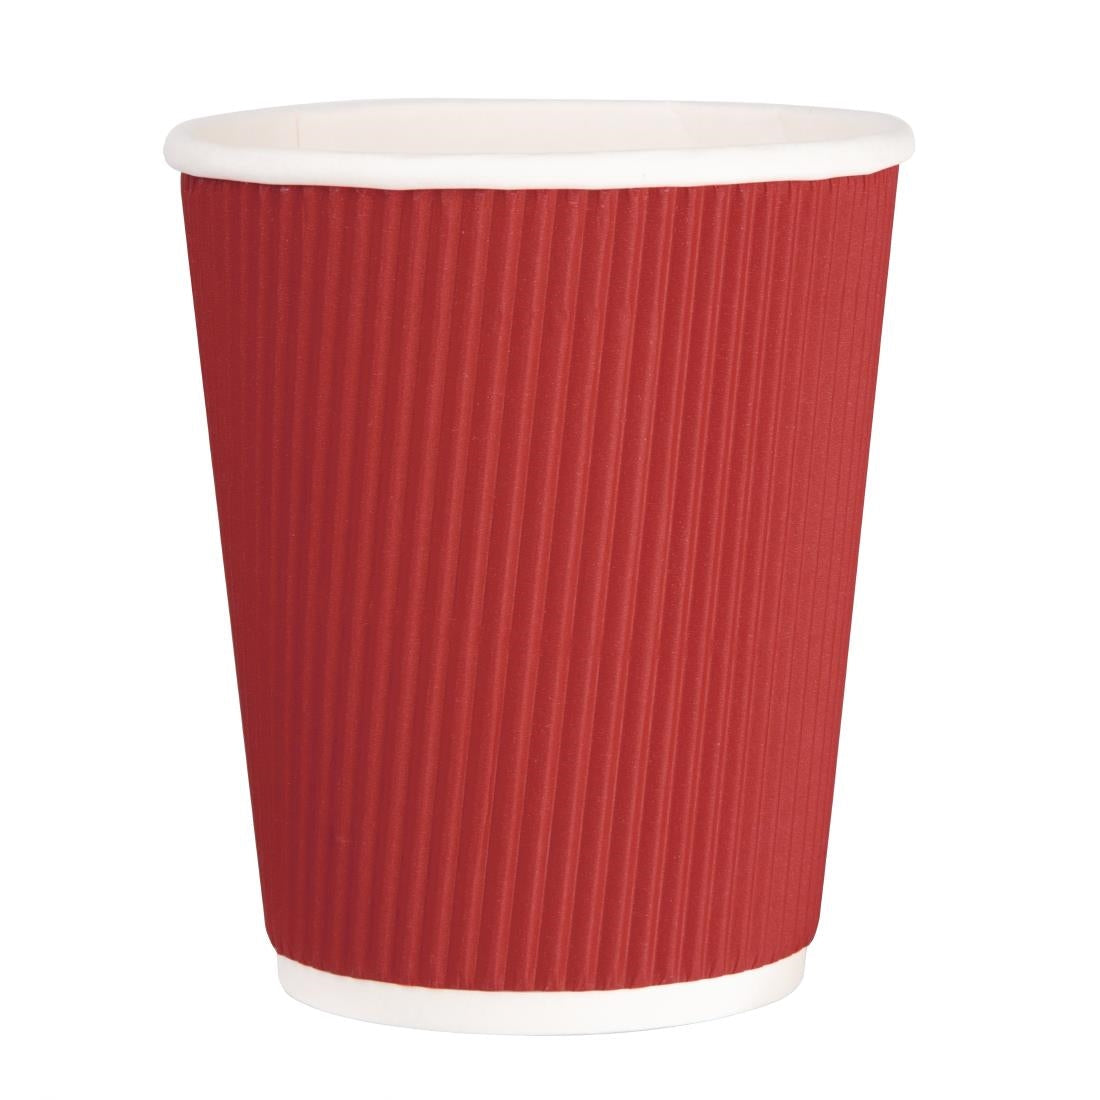 Fiesta Ripple Wall Takeaway Coffee Cups Red 225ml / 8oz (Pack of 500) JD Catering Equipment Solutions Ltd